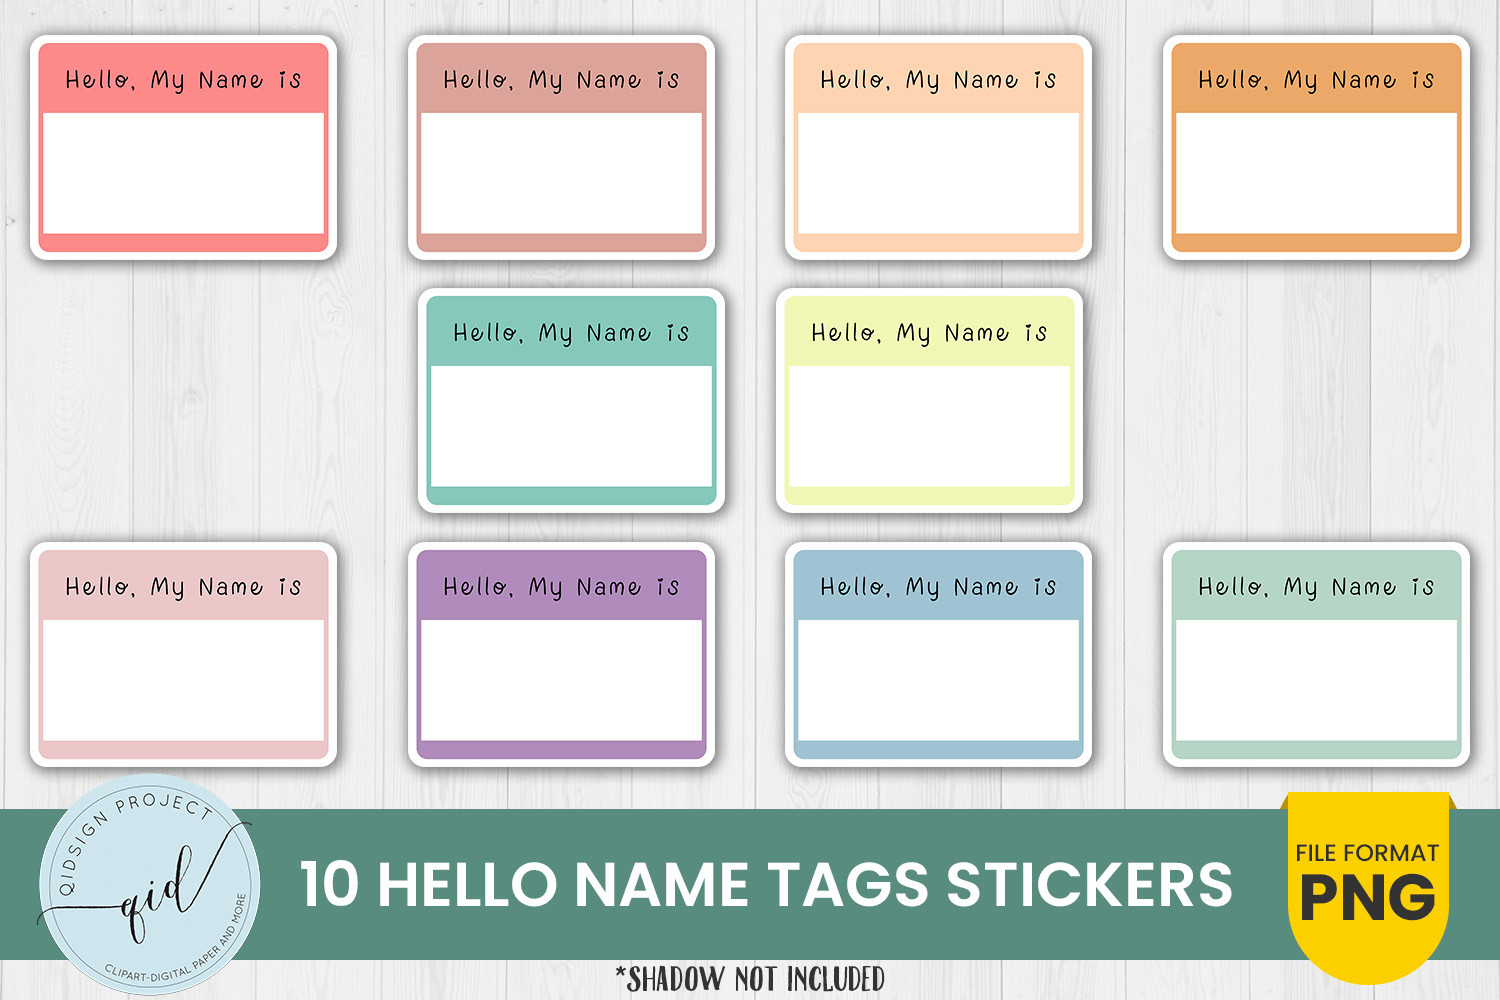 Hello Name Tags Stickers | 10 Variations Graphic by qidsign project ...